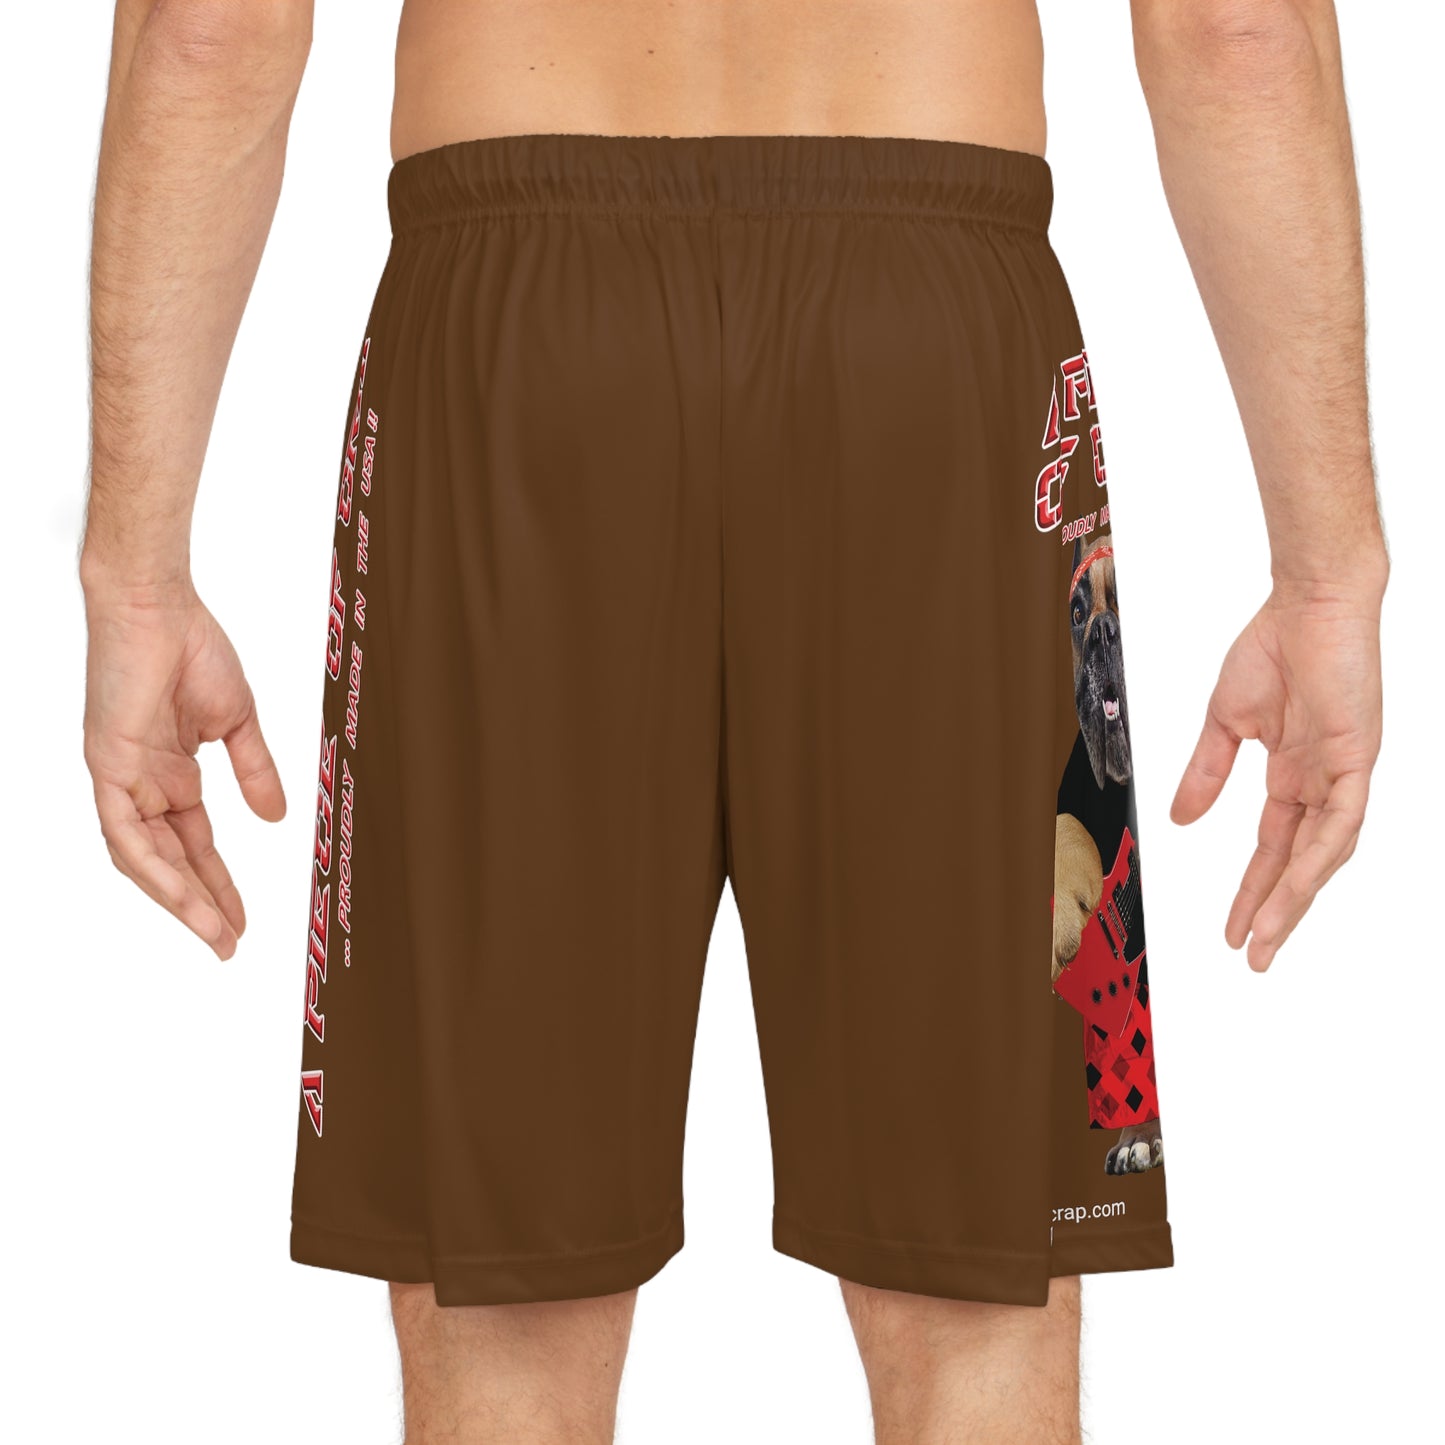 A Piece Of Crap II Basketball Shorts - Brown